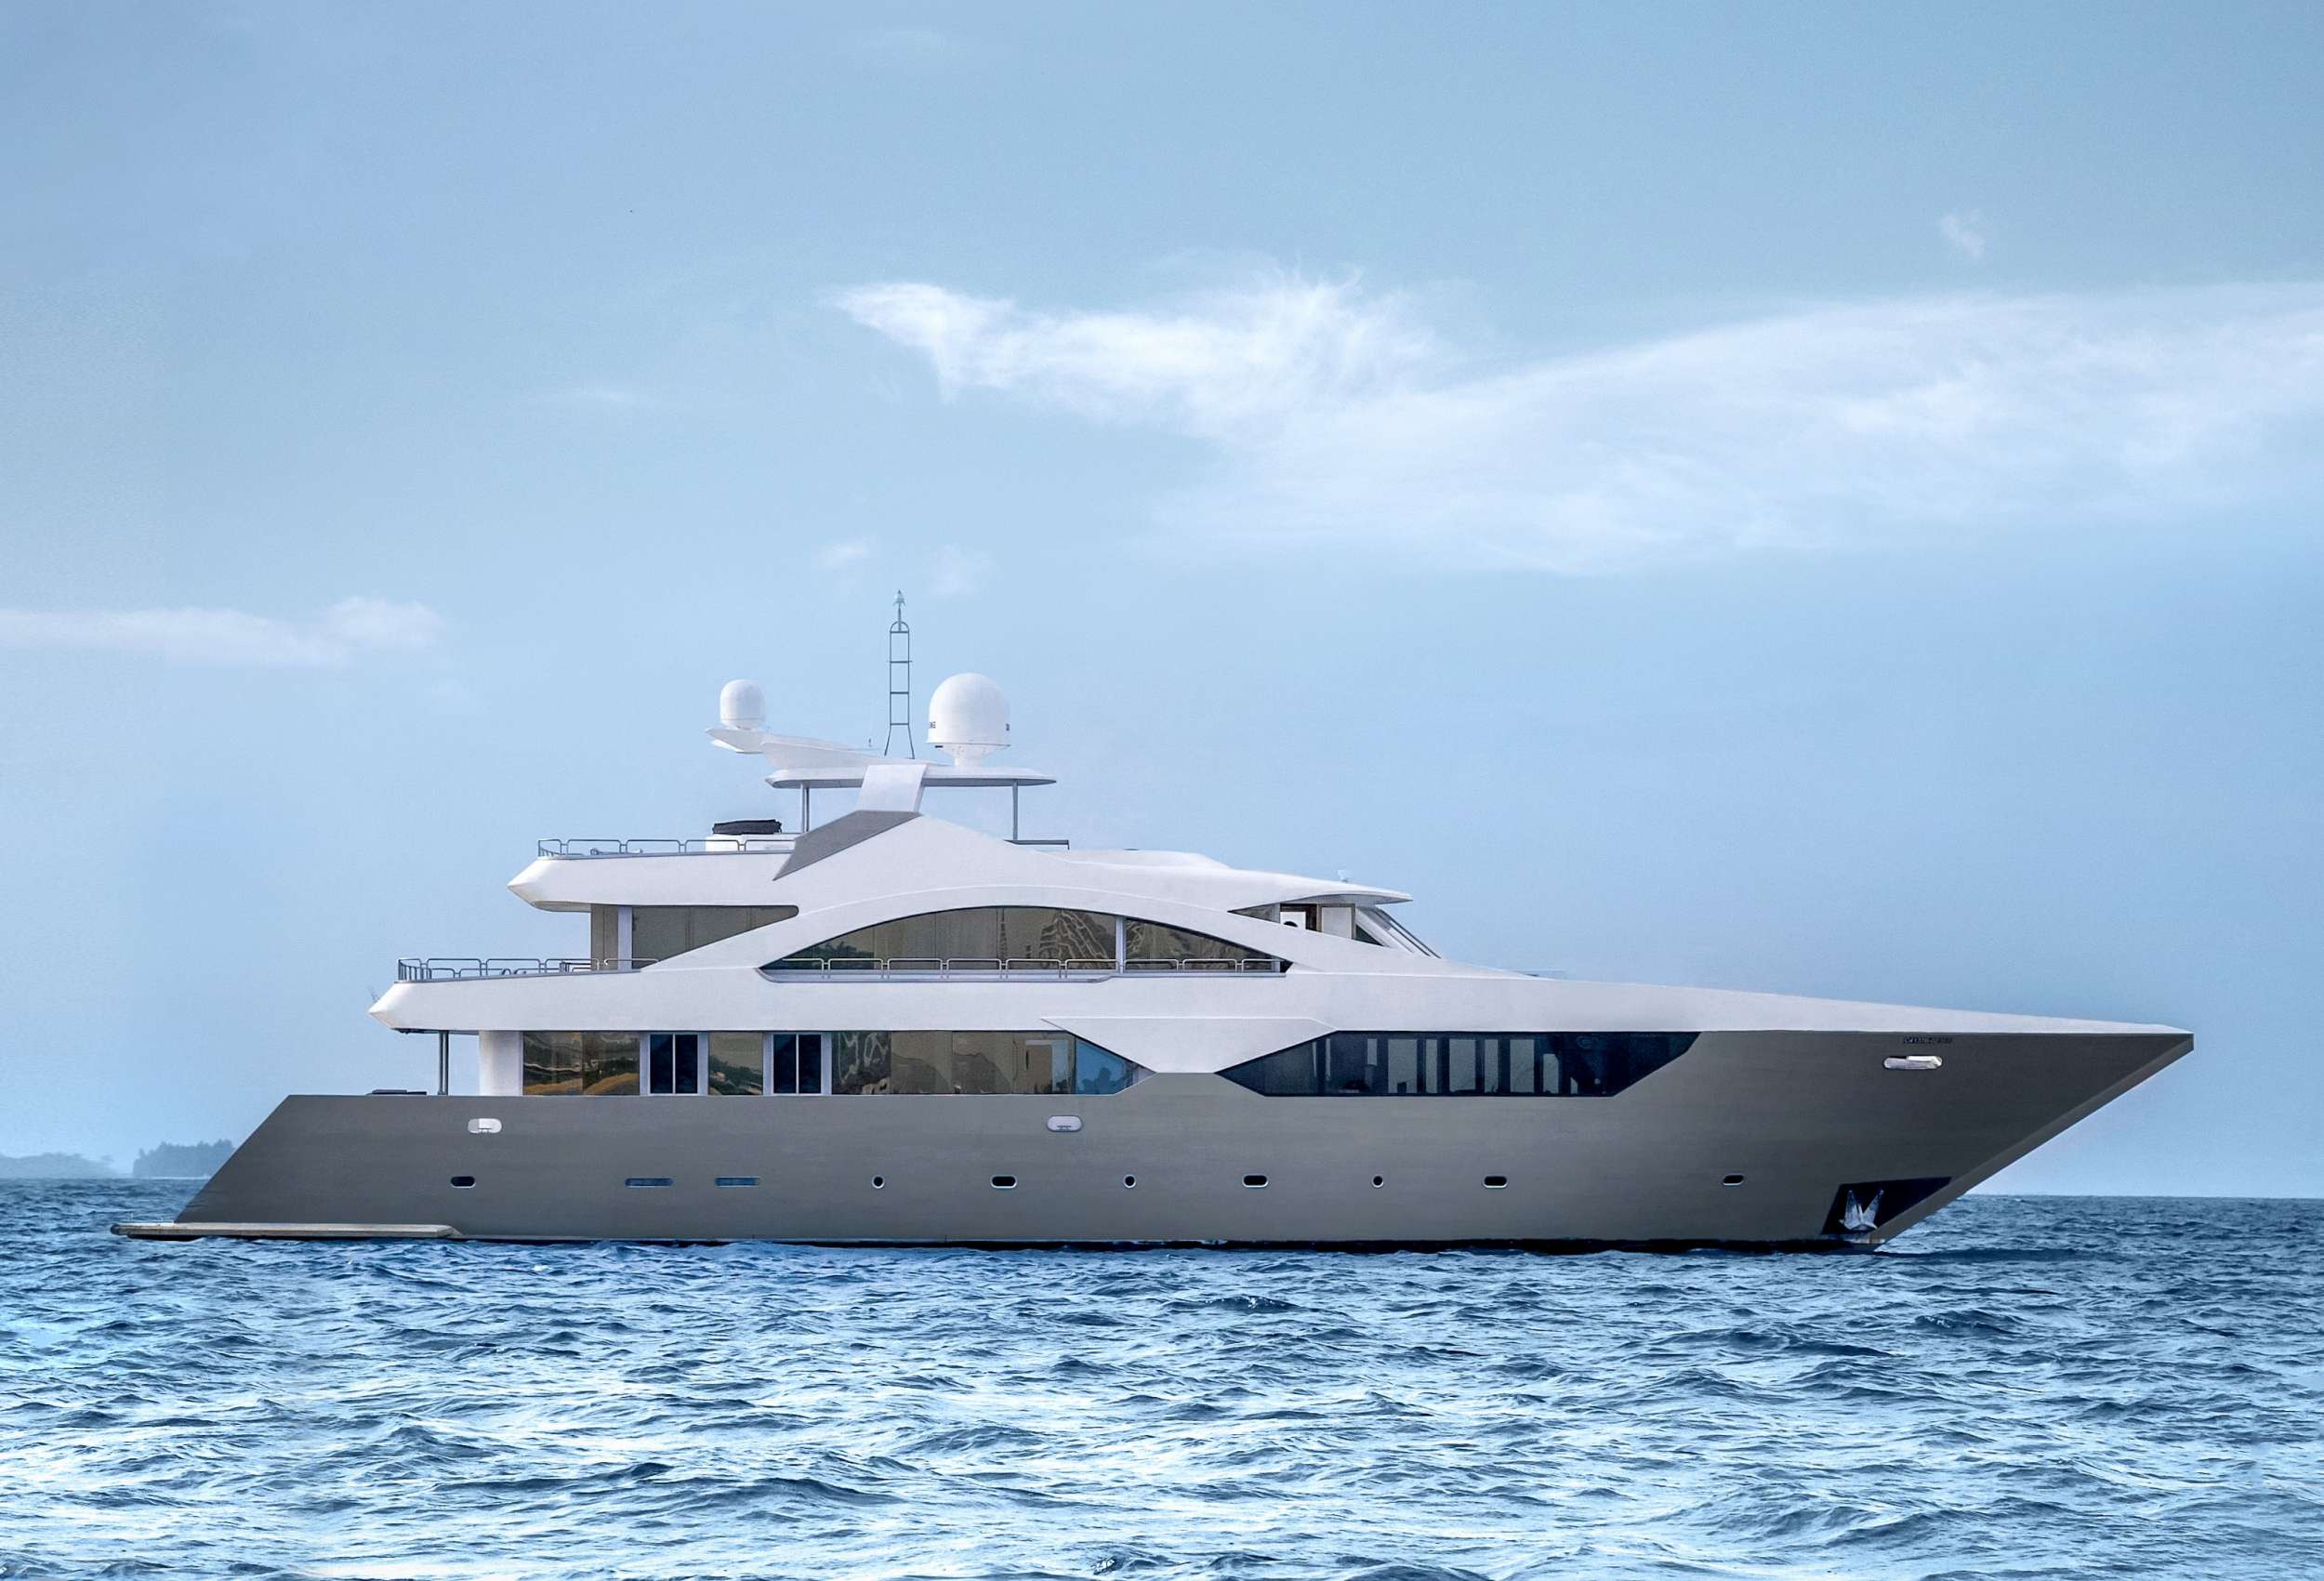 ARK NOBLE - Superyacht charter Thailand & Boat hire in Indian Ocean & SE Asia 1